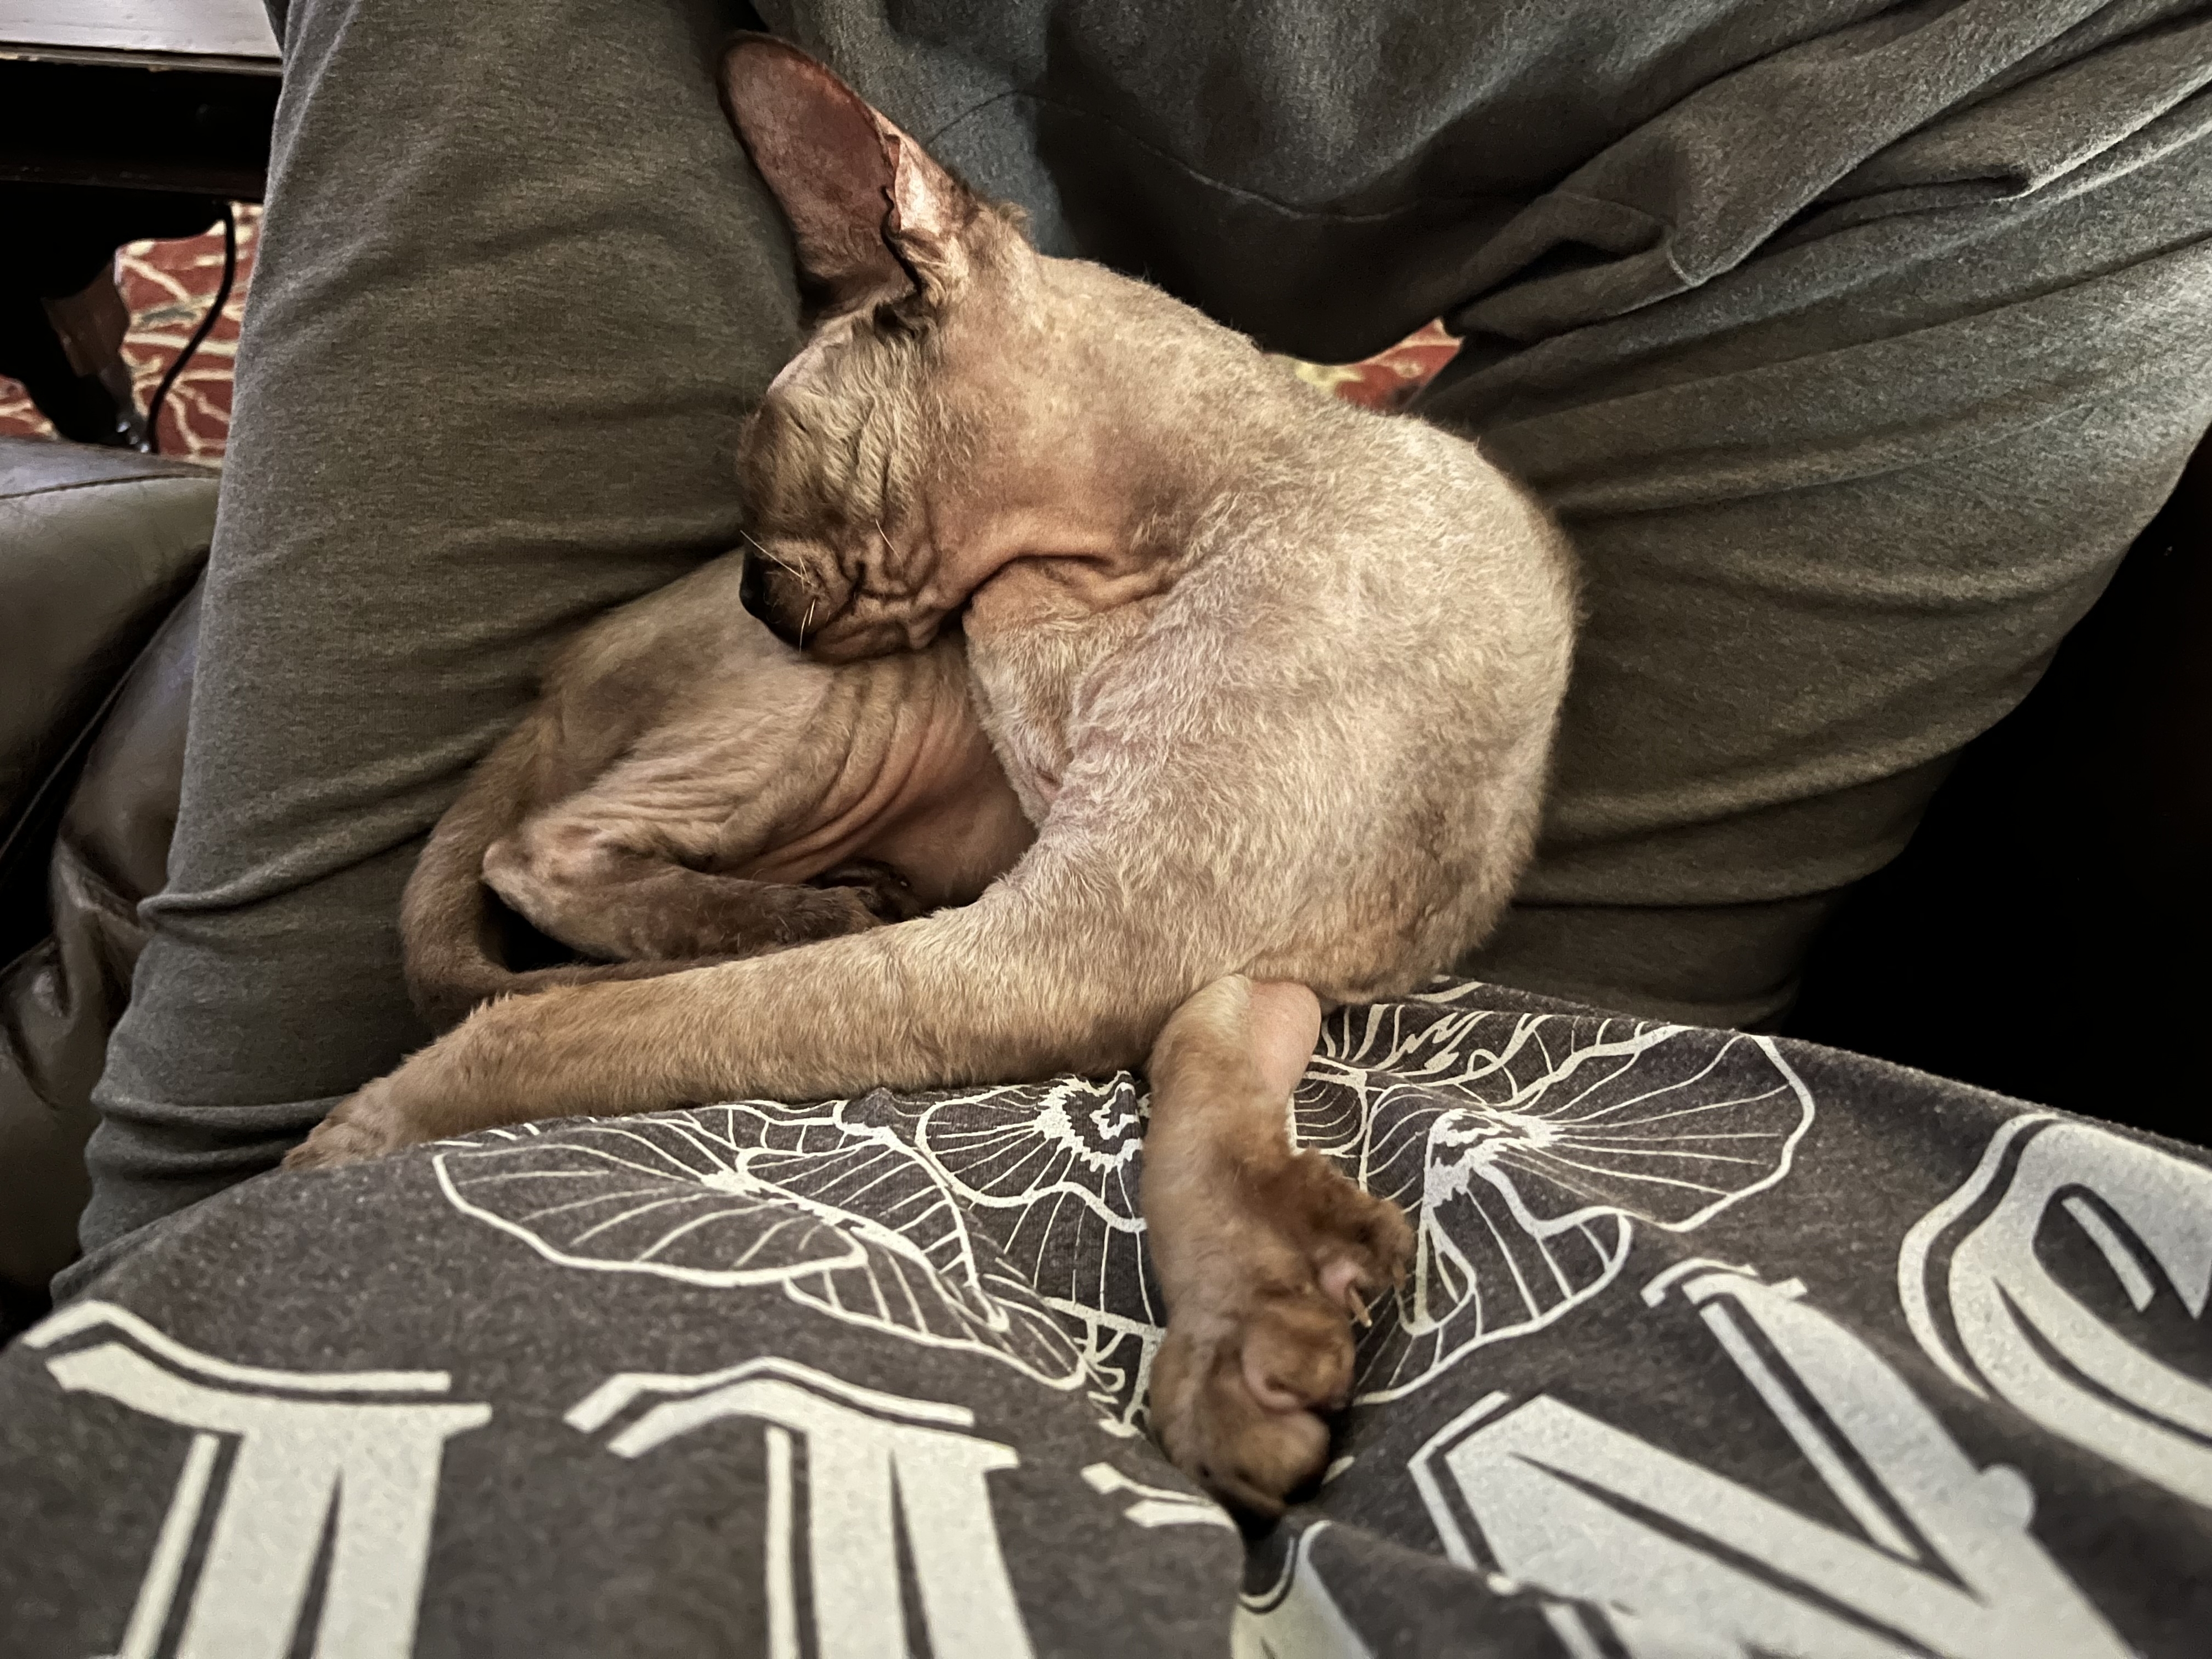 A hairless cat is curled up and asleep on a person&#x27;s lap with their limbs in a weird, uncomfortable position